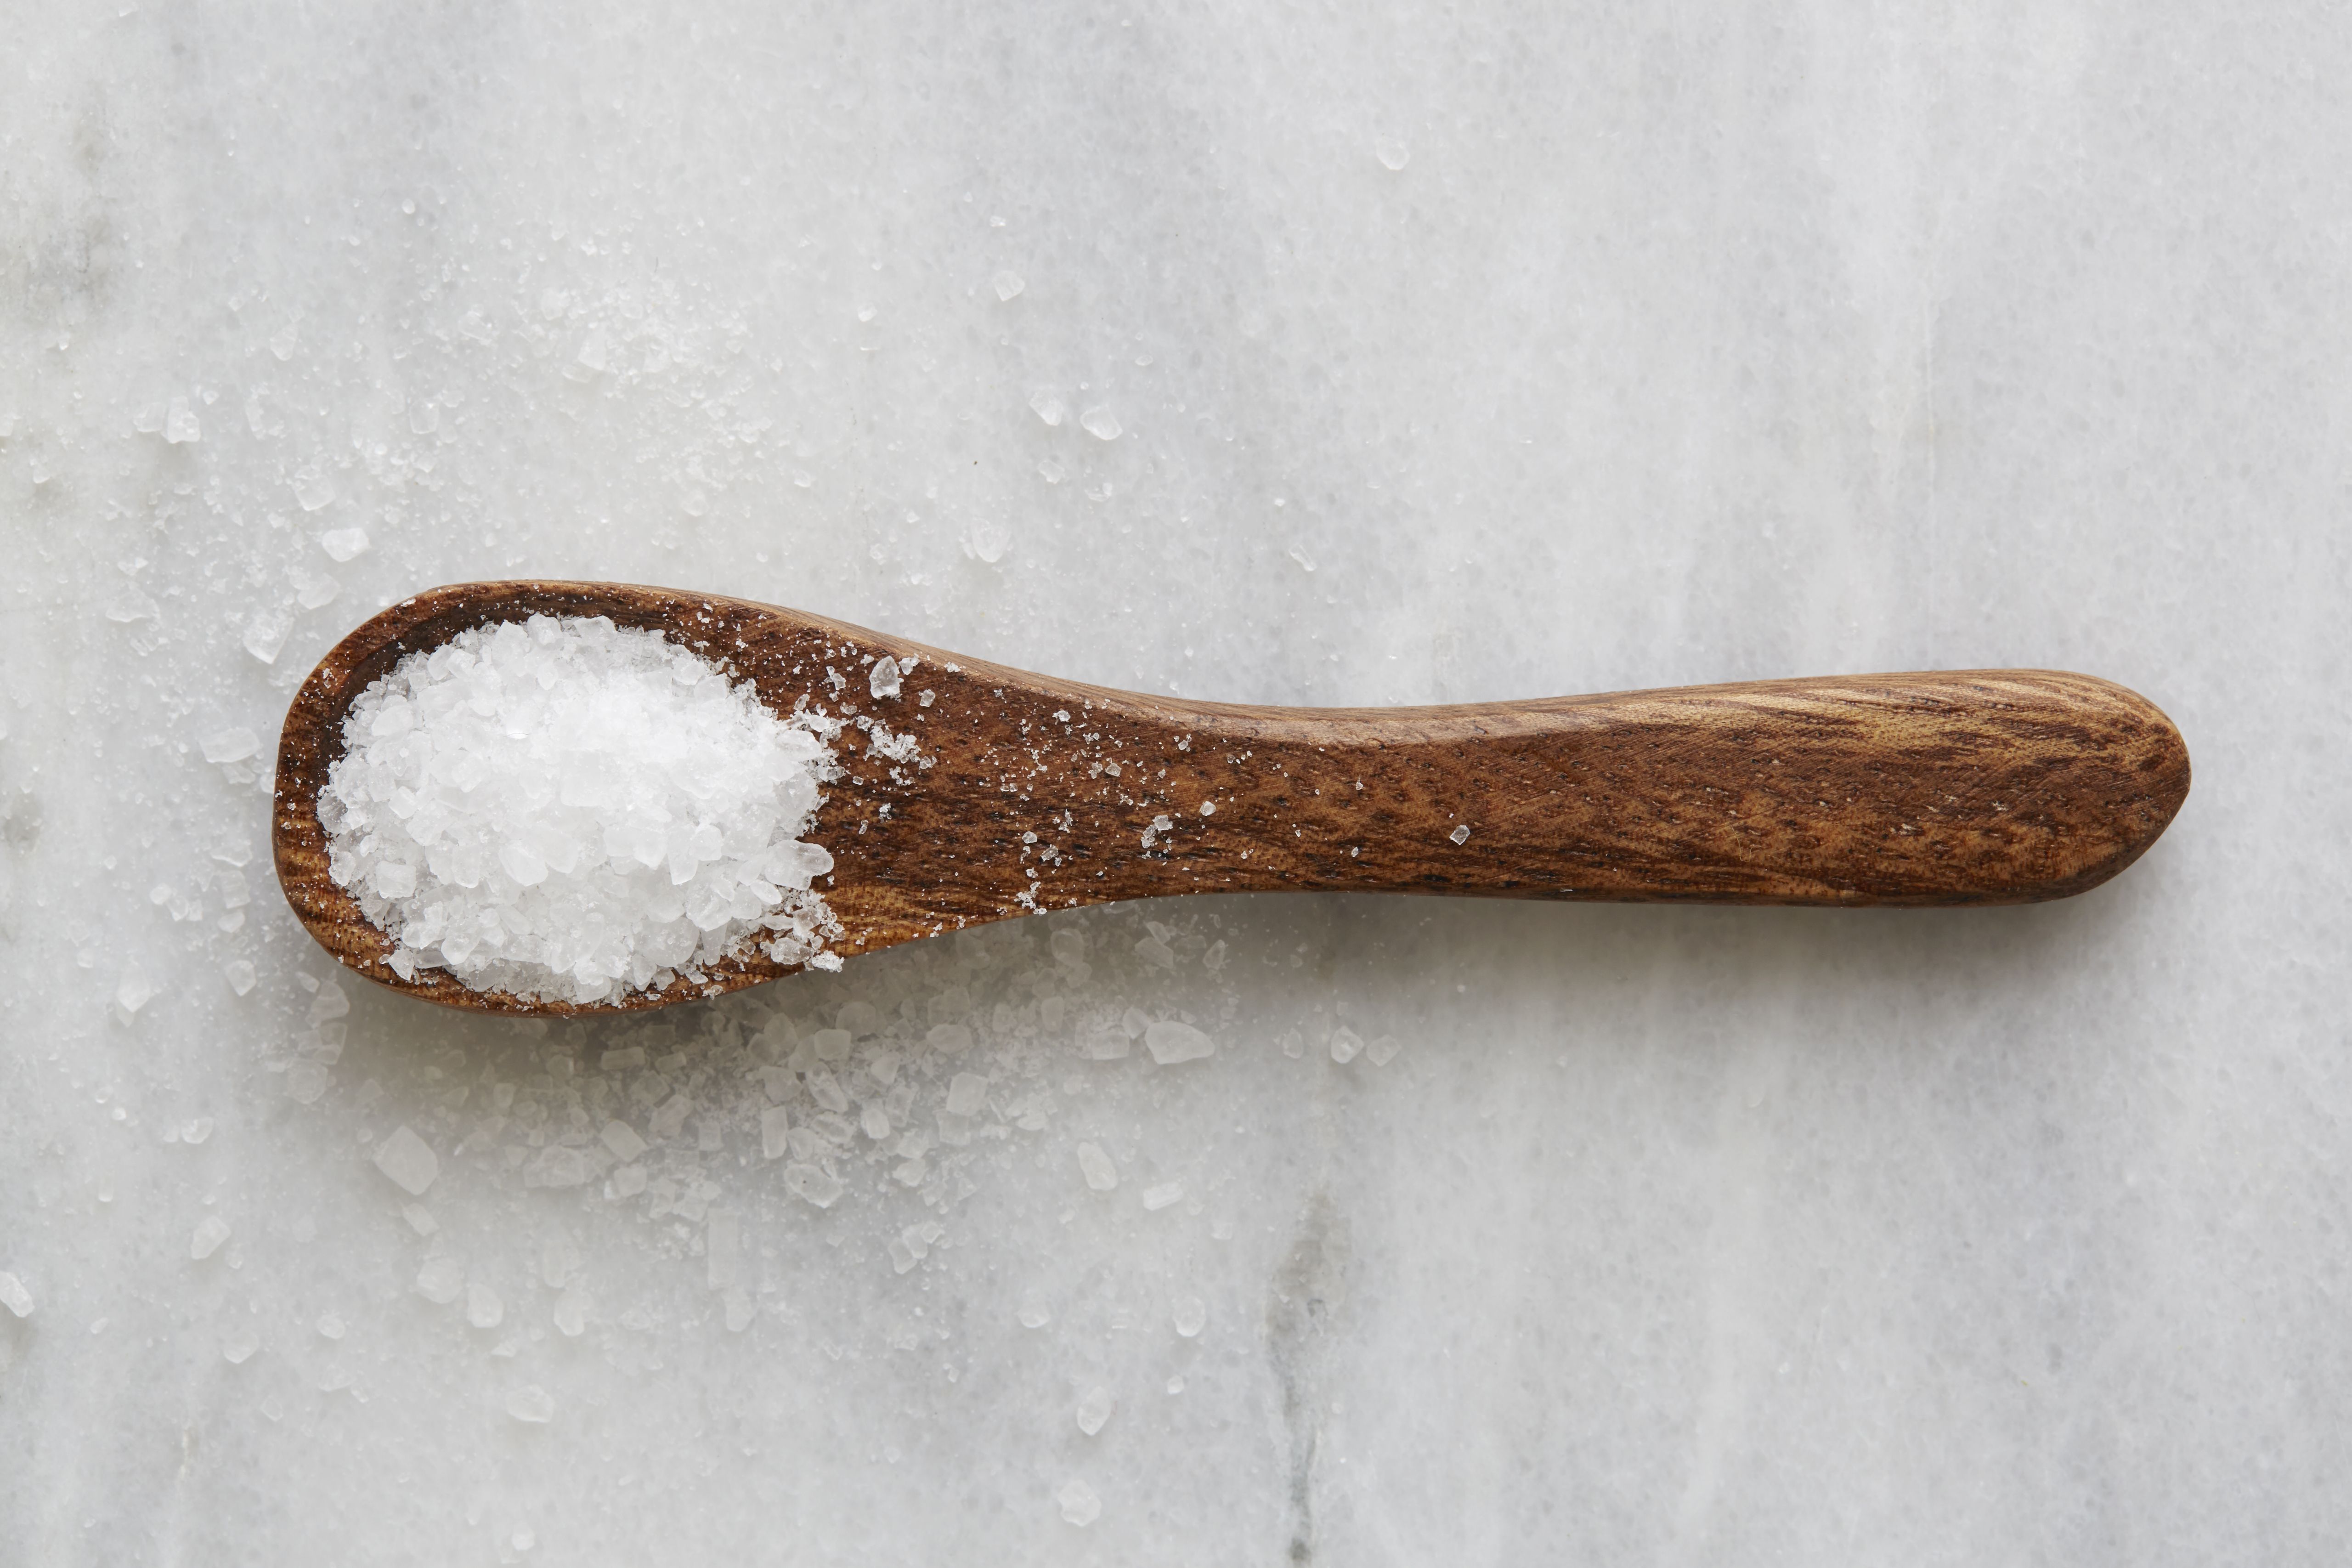 10 Ways To Use Salt For Gorgeous Skin, Hair, Teeth, And Nails